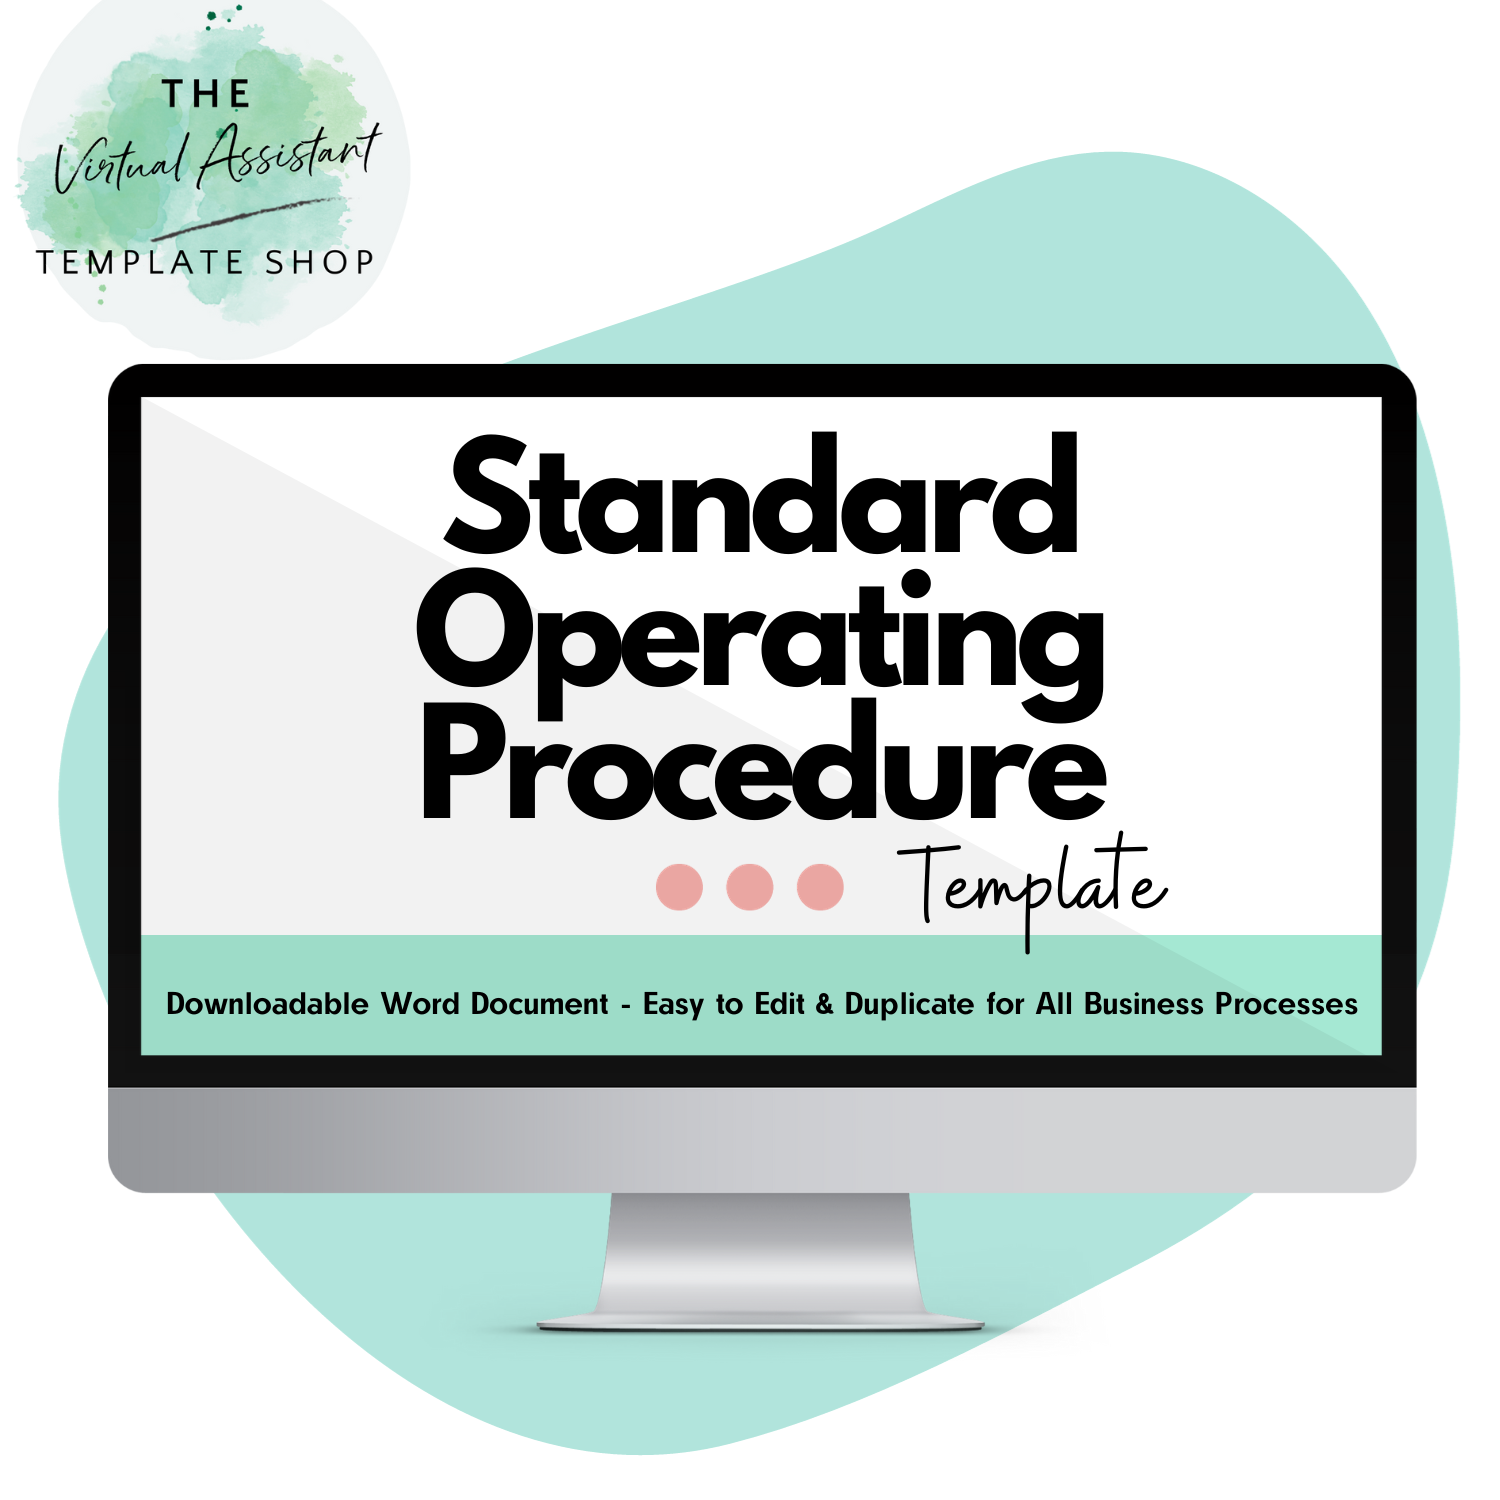 Standard Operating Procedure Template, SOP Template for Business Owners, Small Business, Virtual Assistant, VA, OBM, Project Management, Project Management, Google Doc Template, SOP Template, Microsoft Word Template, Business SOP Document